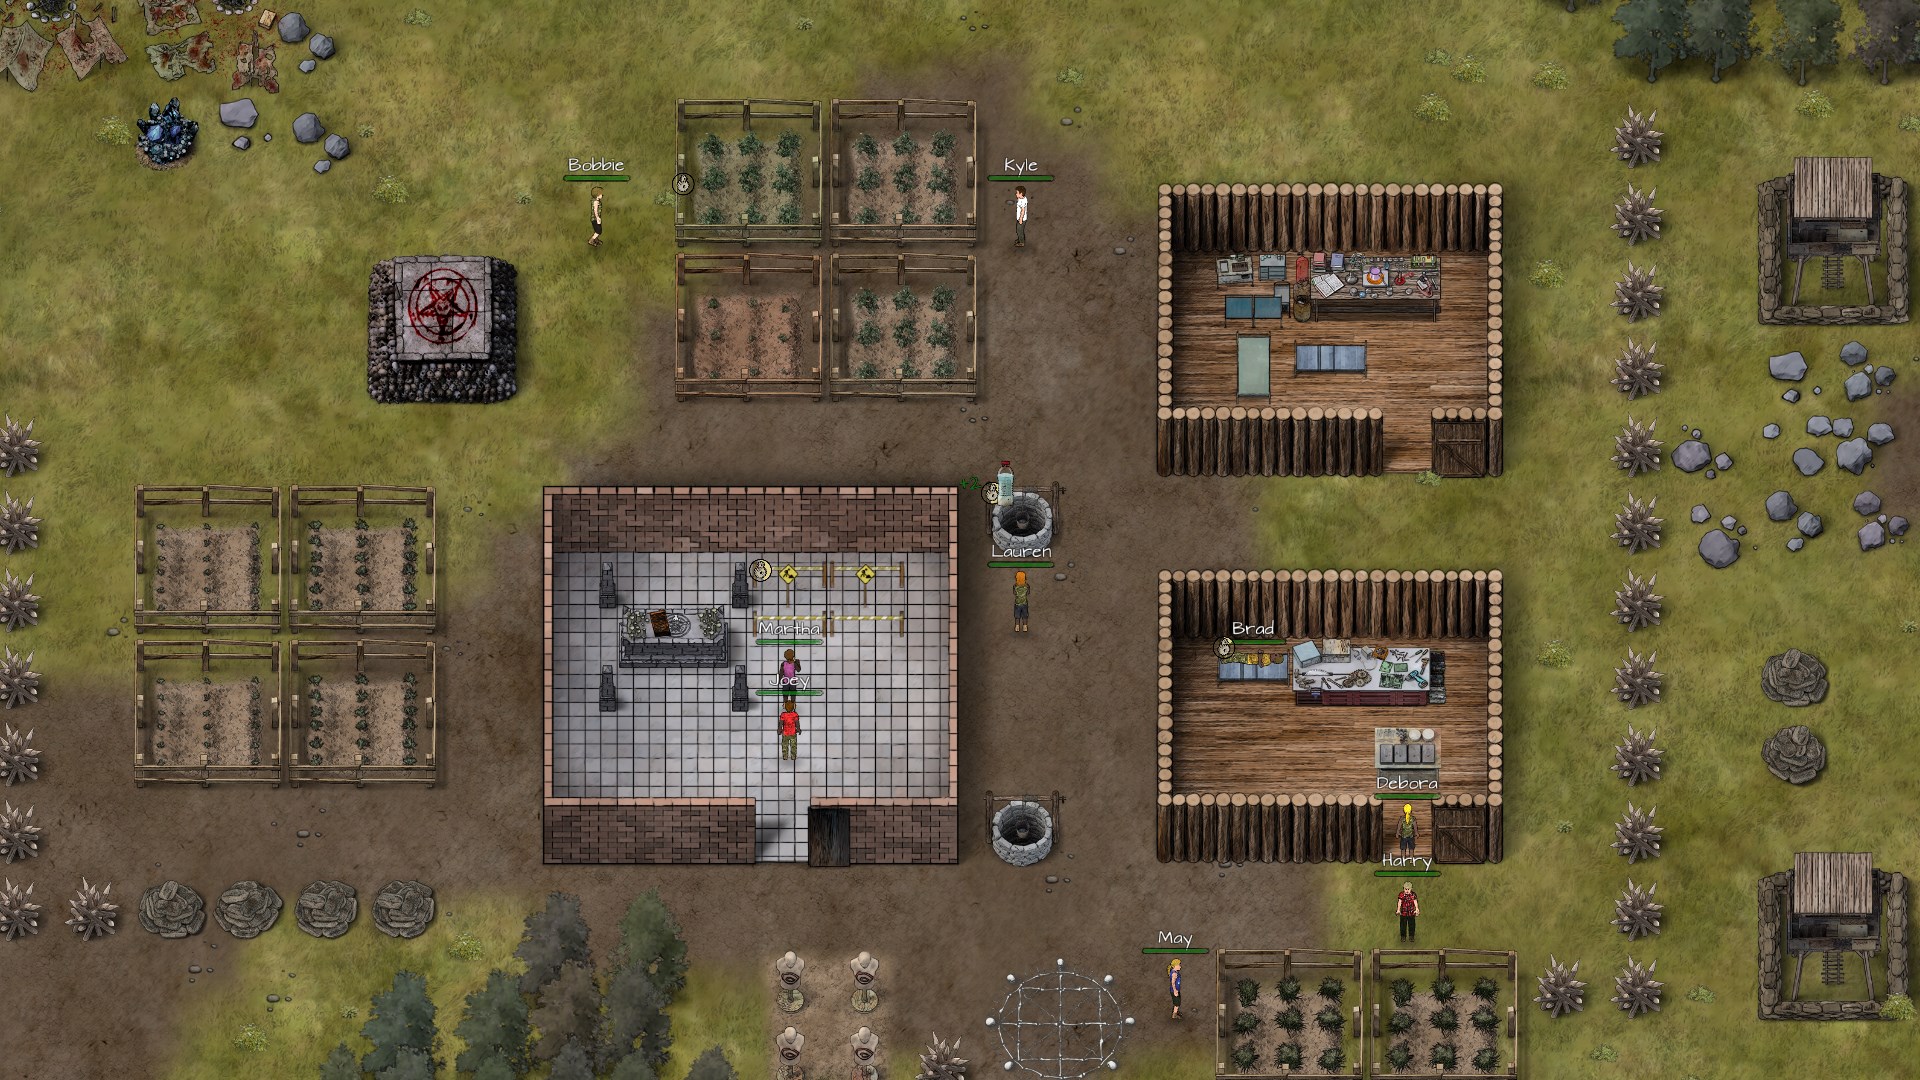 colony survival game download